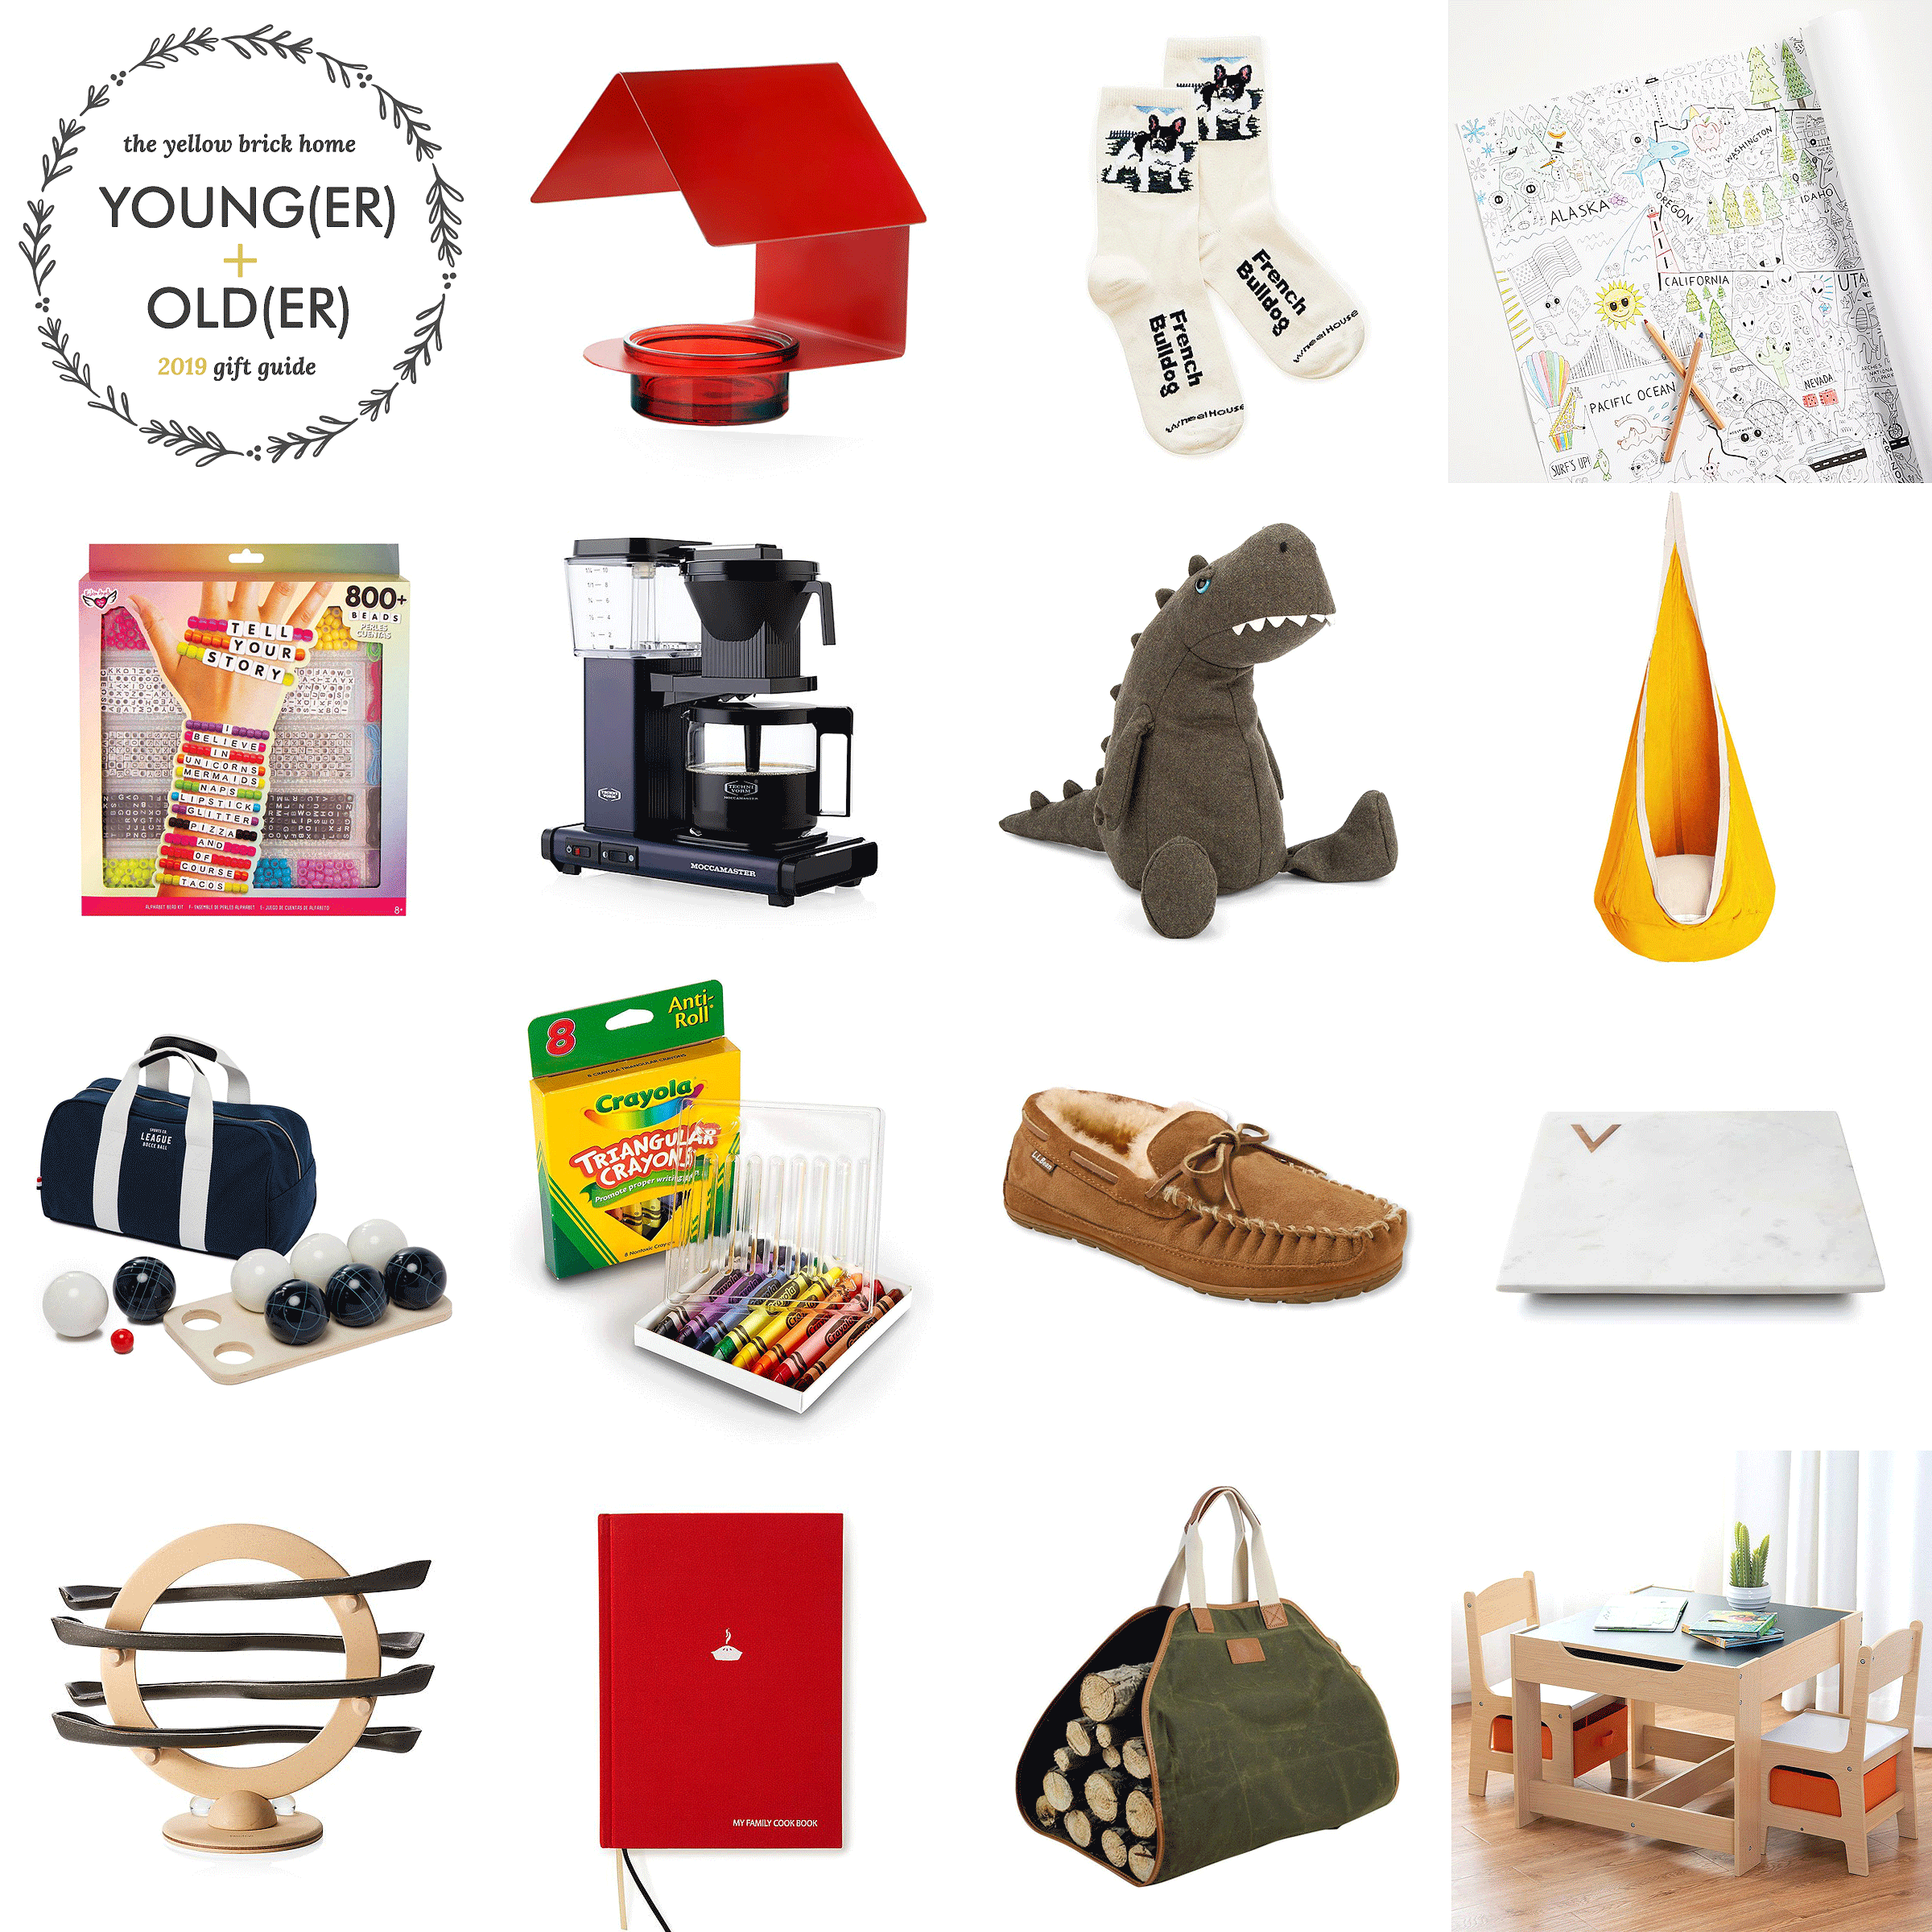 Best gift ideas for toddlers and empty-nesters